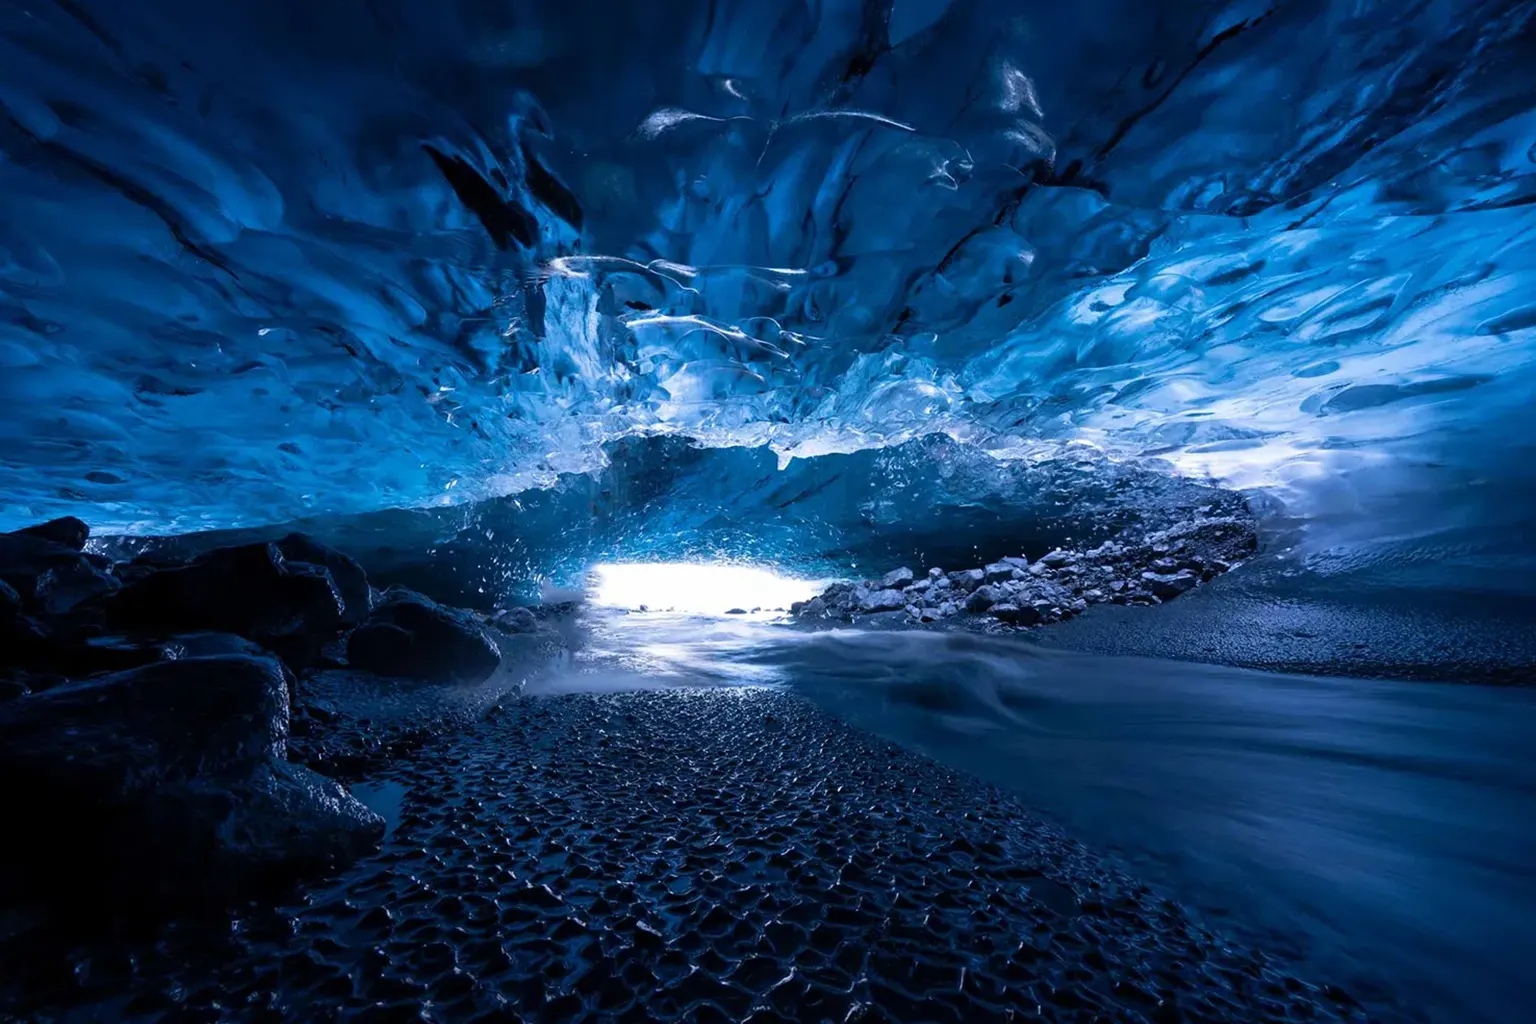 6. Blue Ice Cave and South Coast